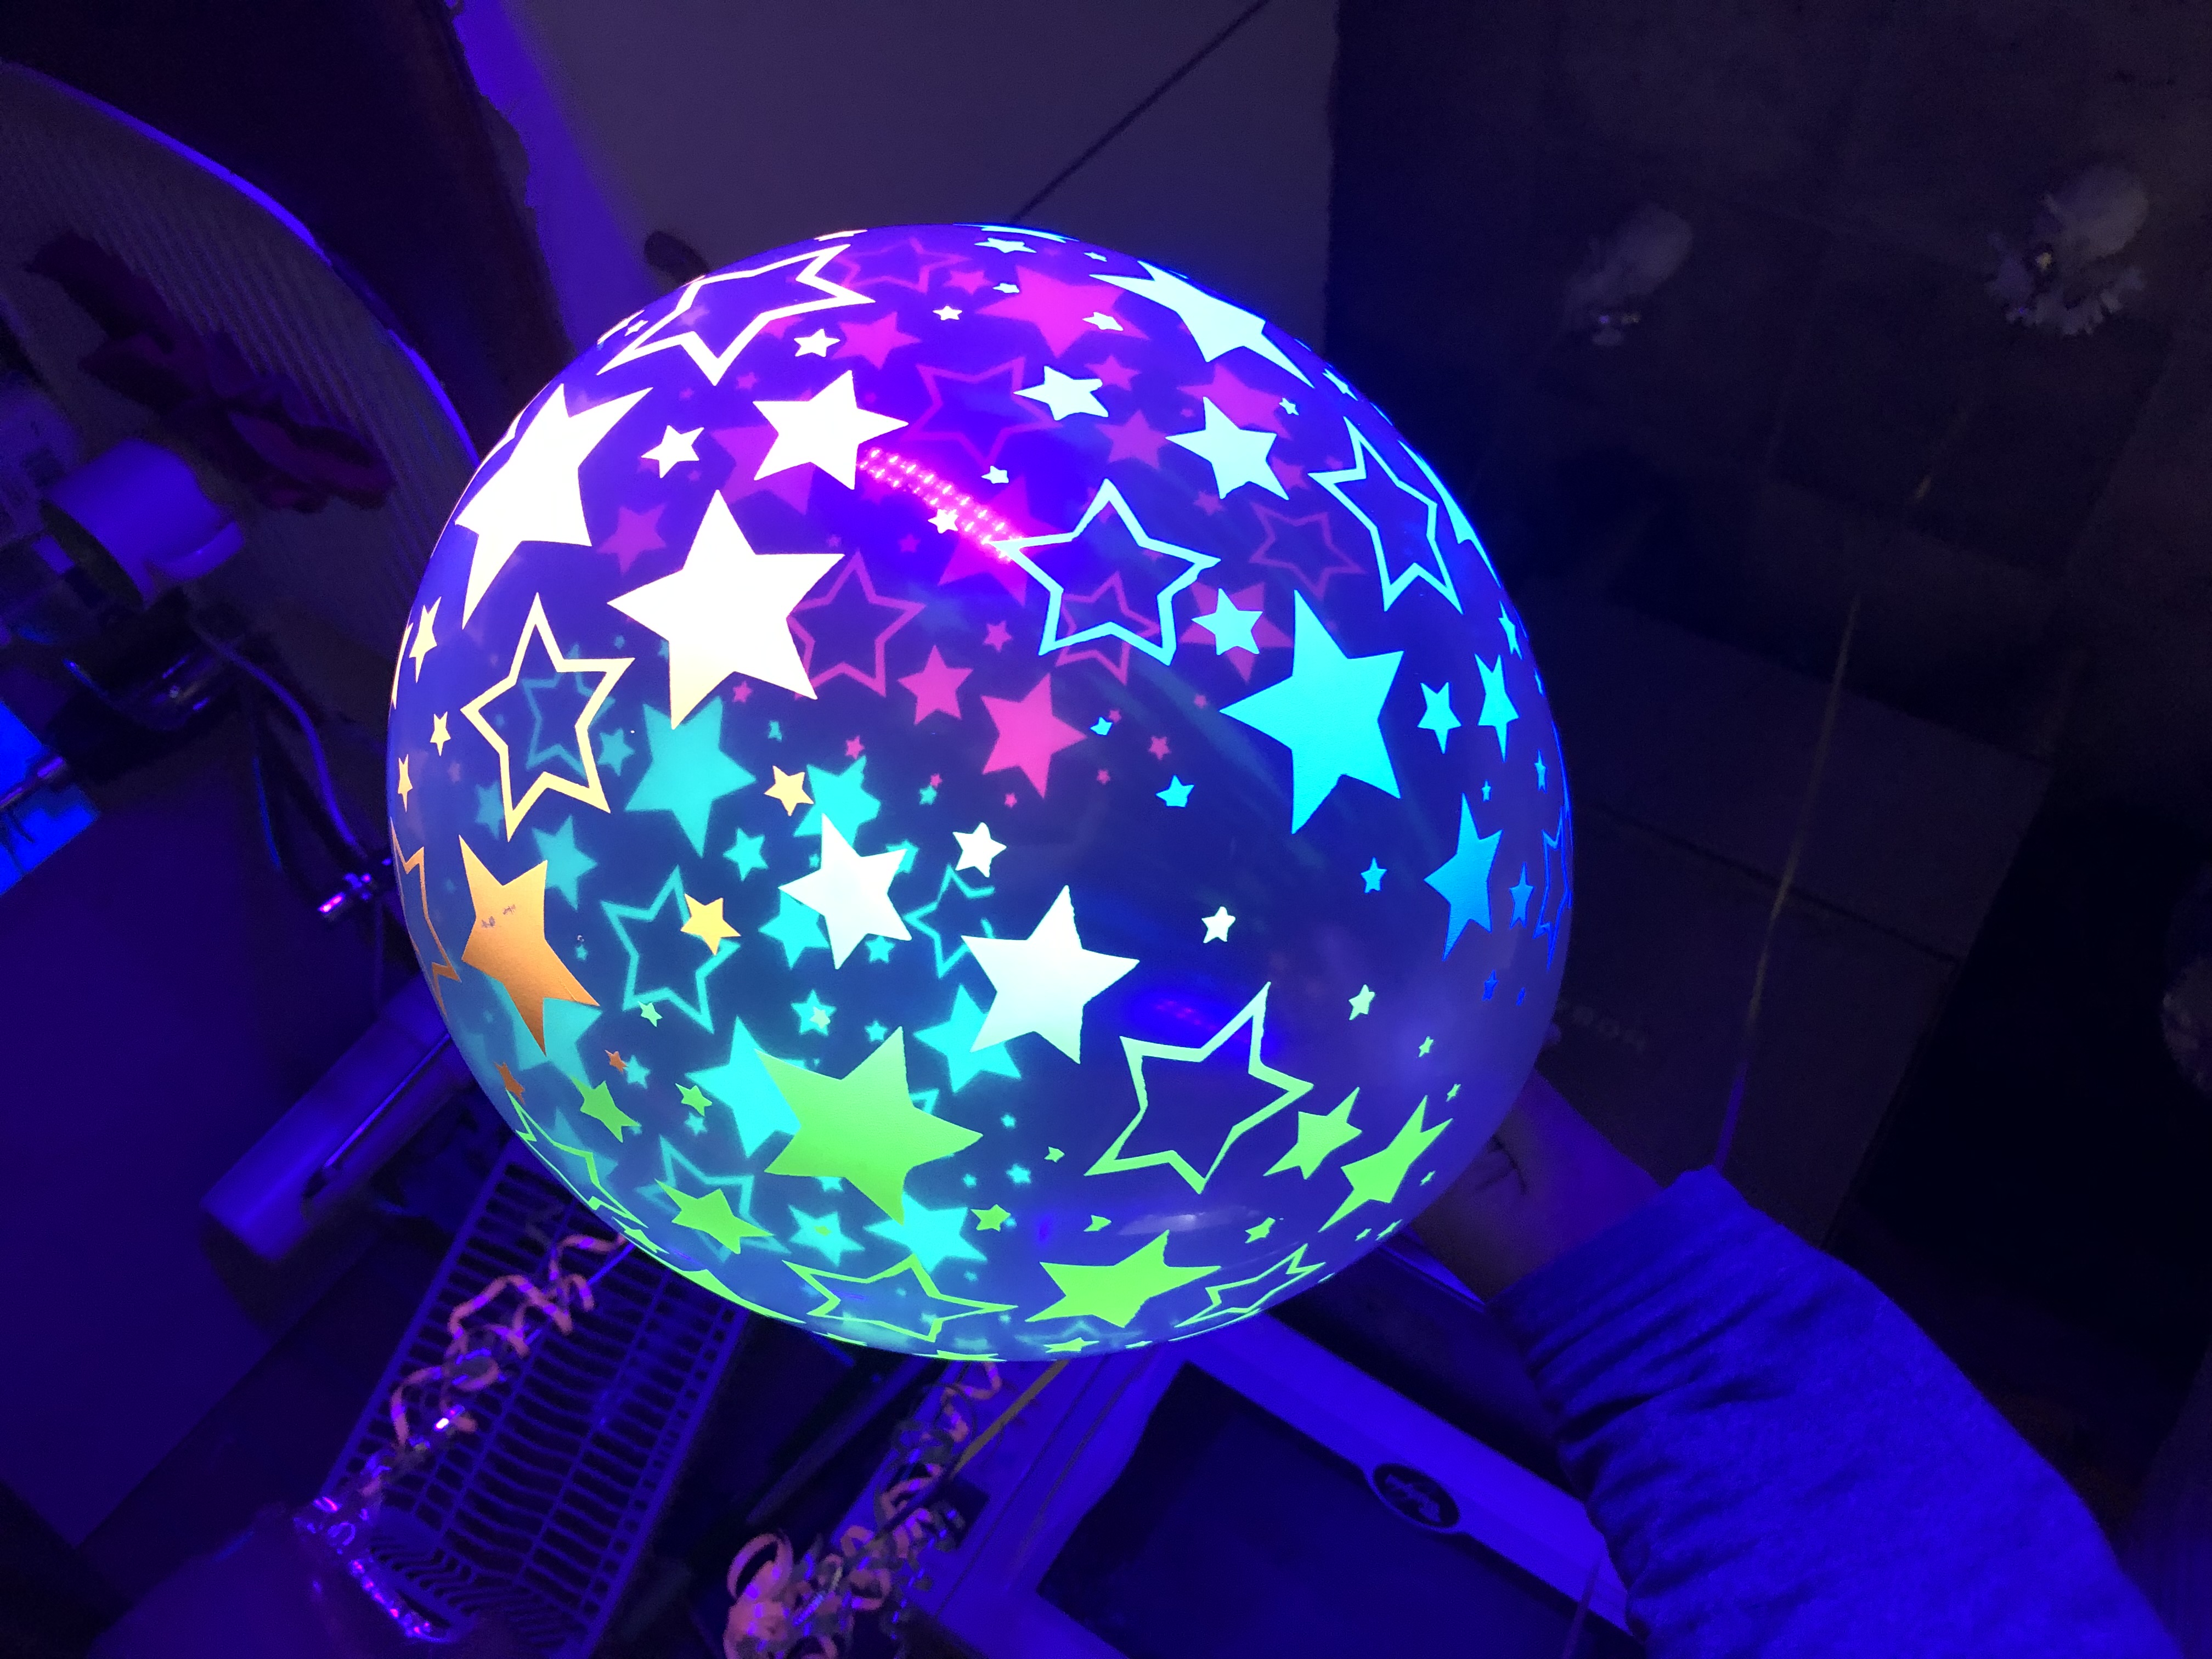 UV Black light hire- Make your party glow with our black light hire